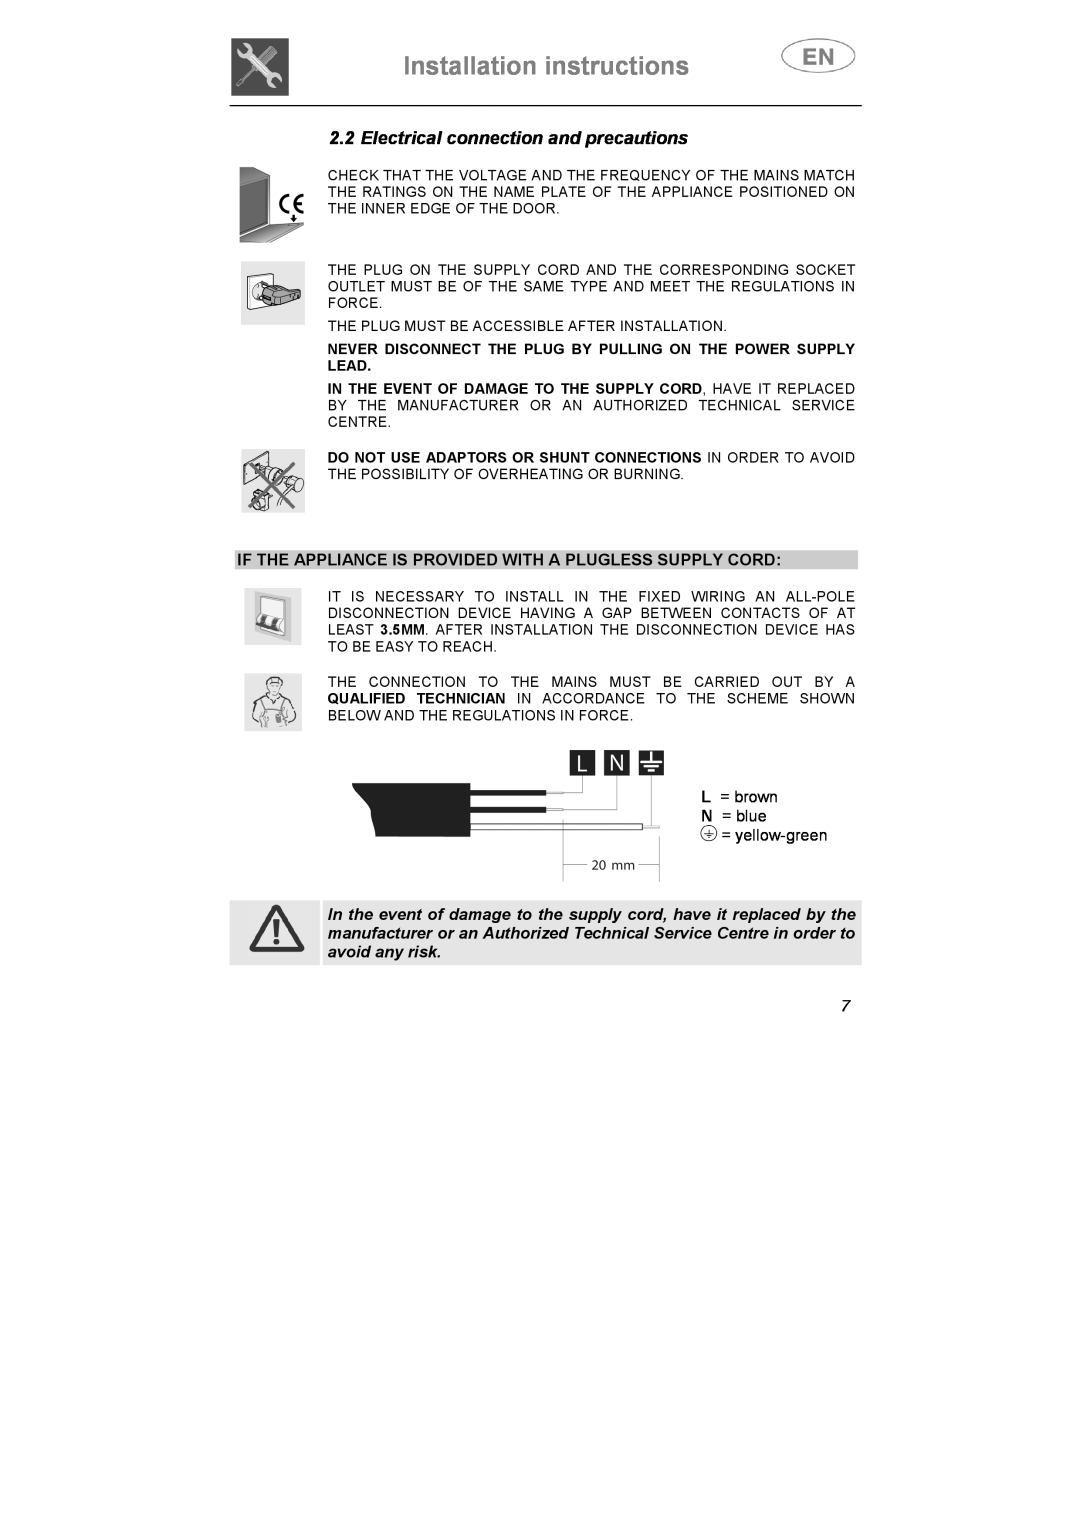 Smeg STA645Q manual Installation instructions, Electrical connection and precautions 